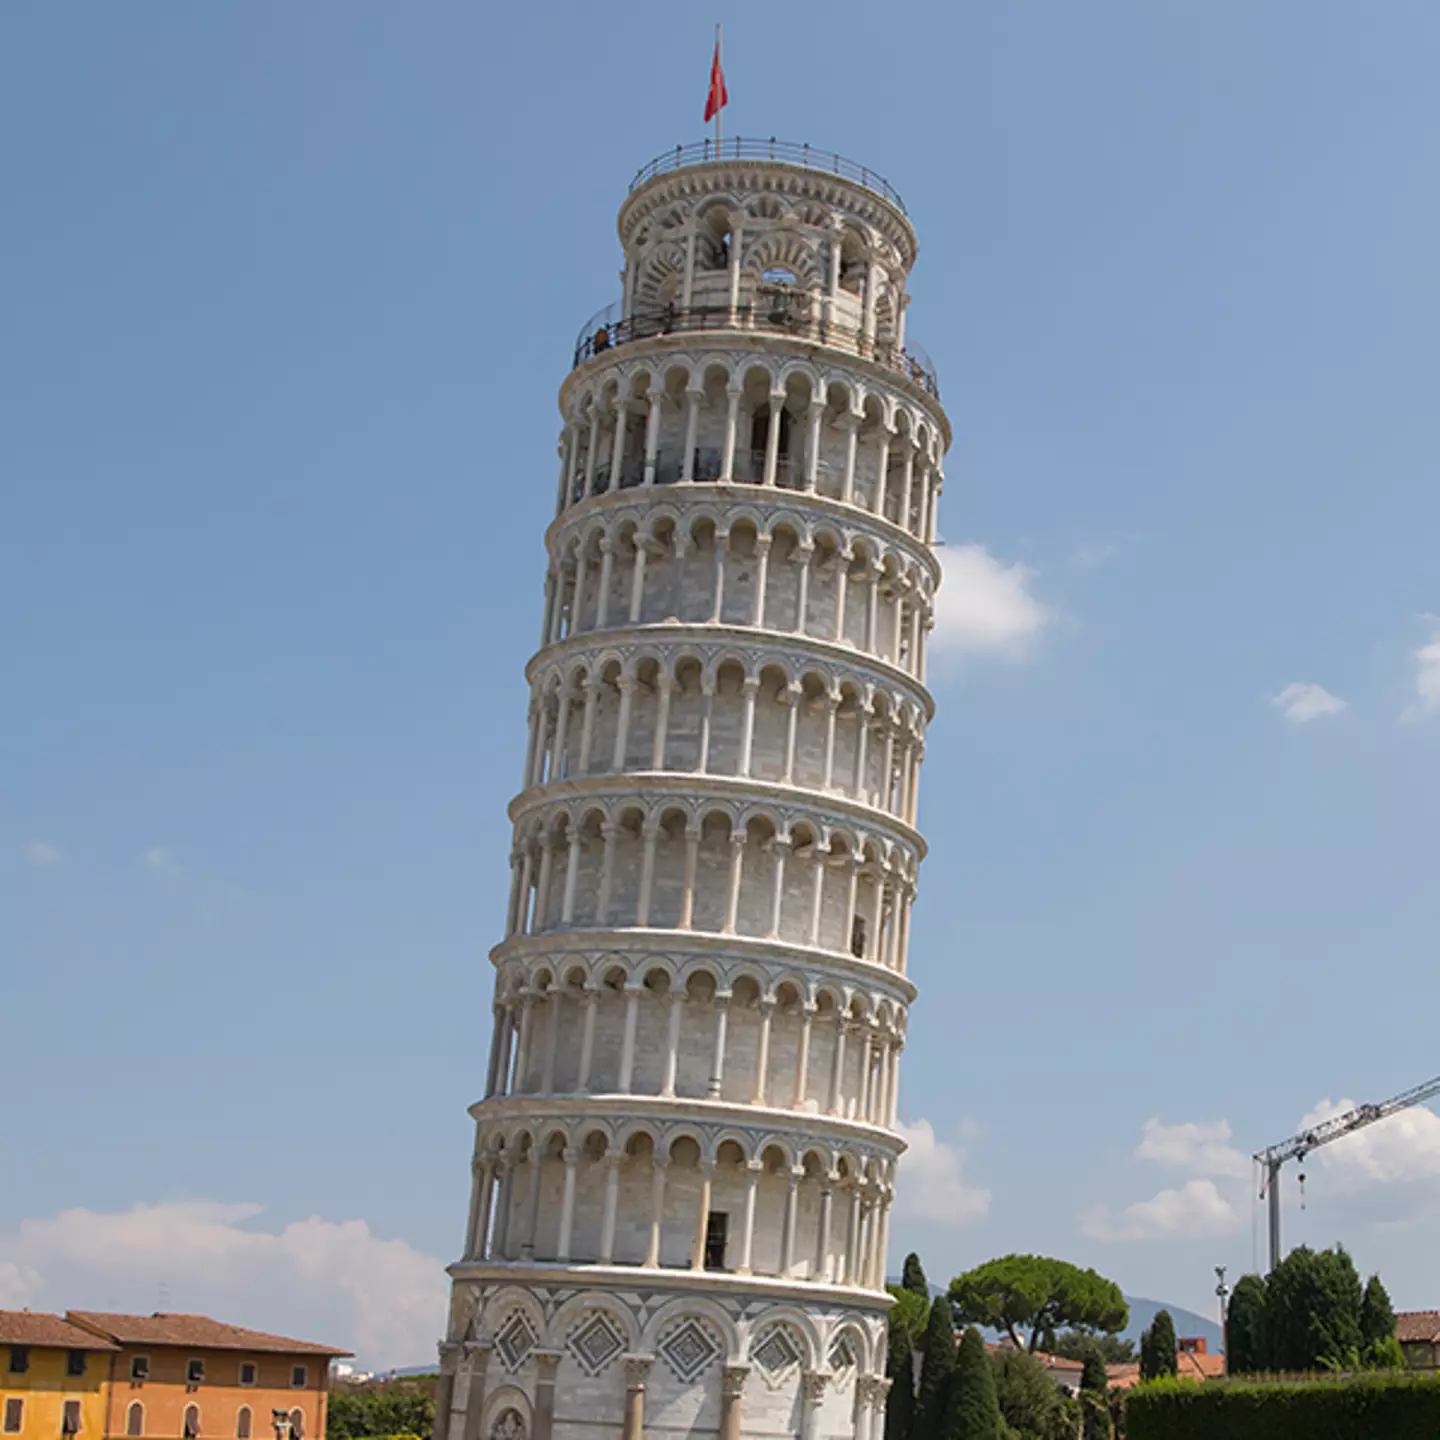 Reason why the Leaning Tower of Pisa hasn't toppled over